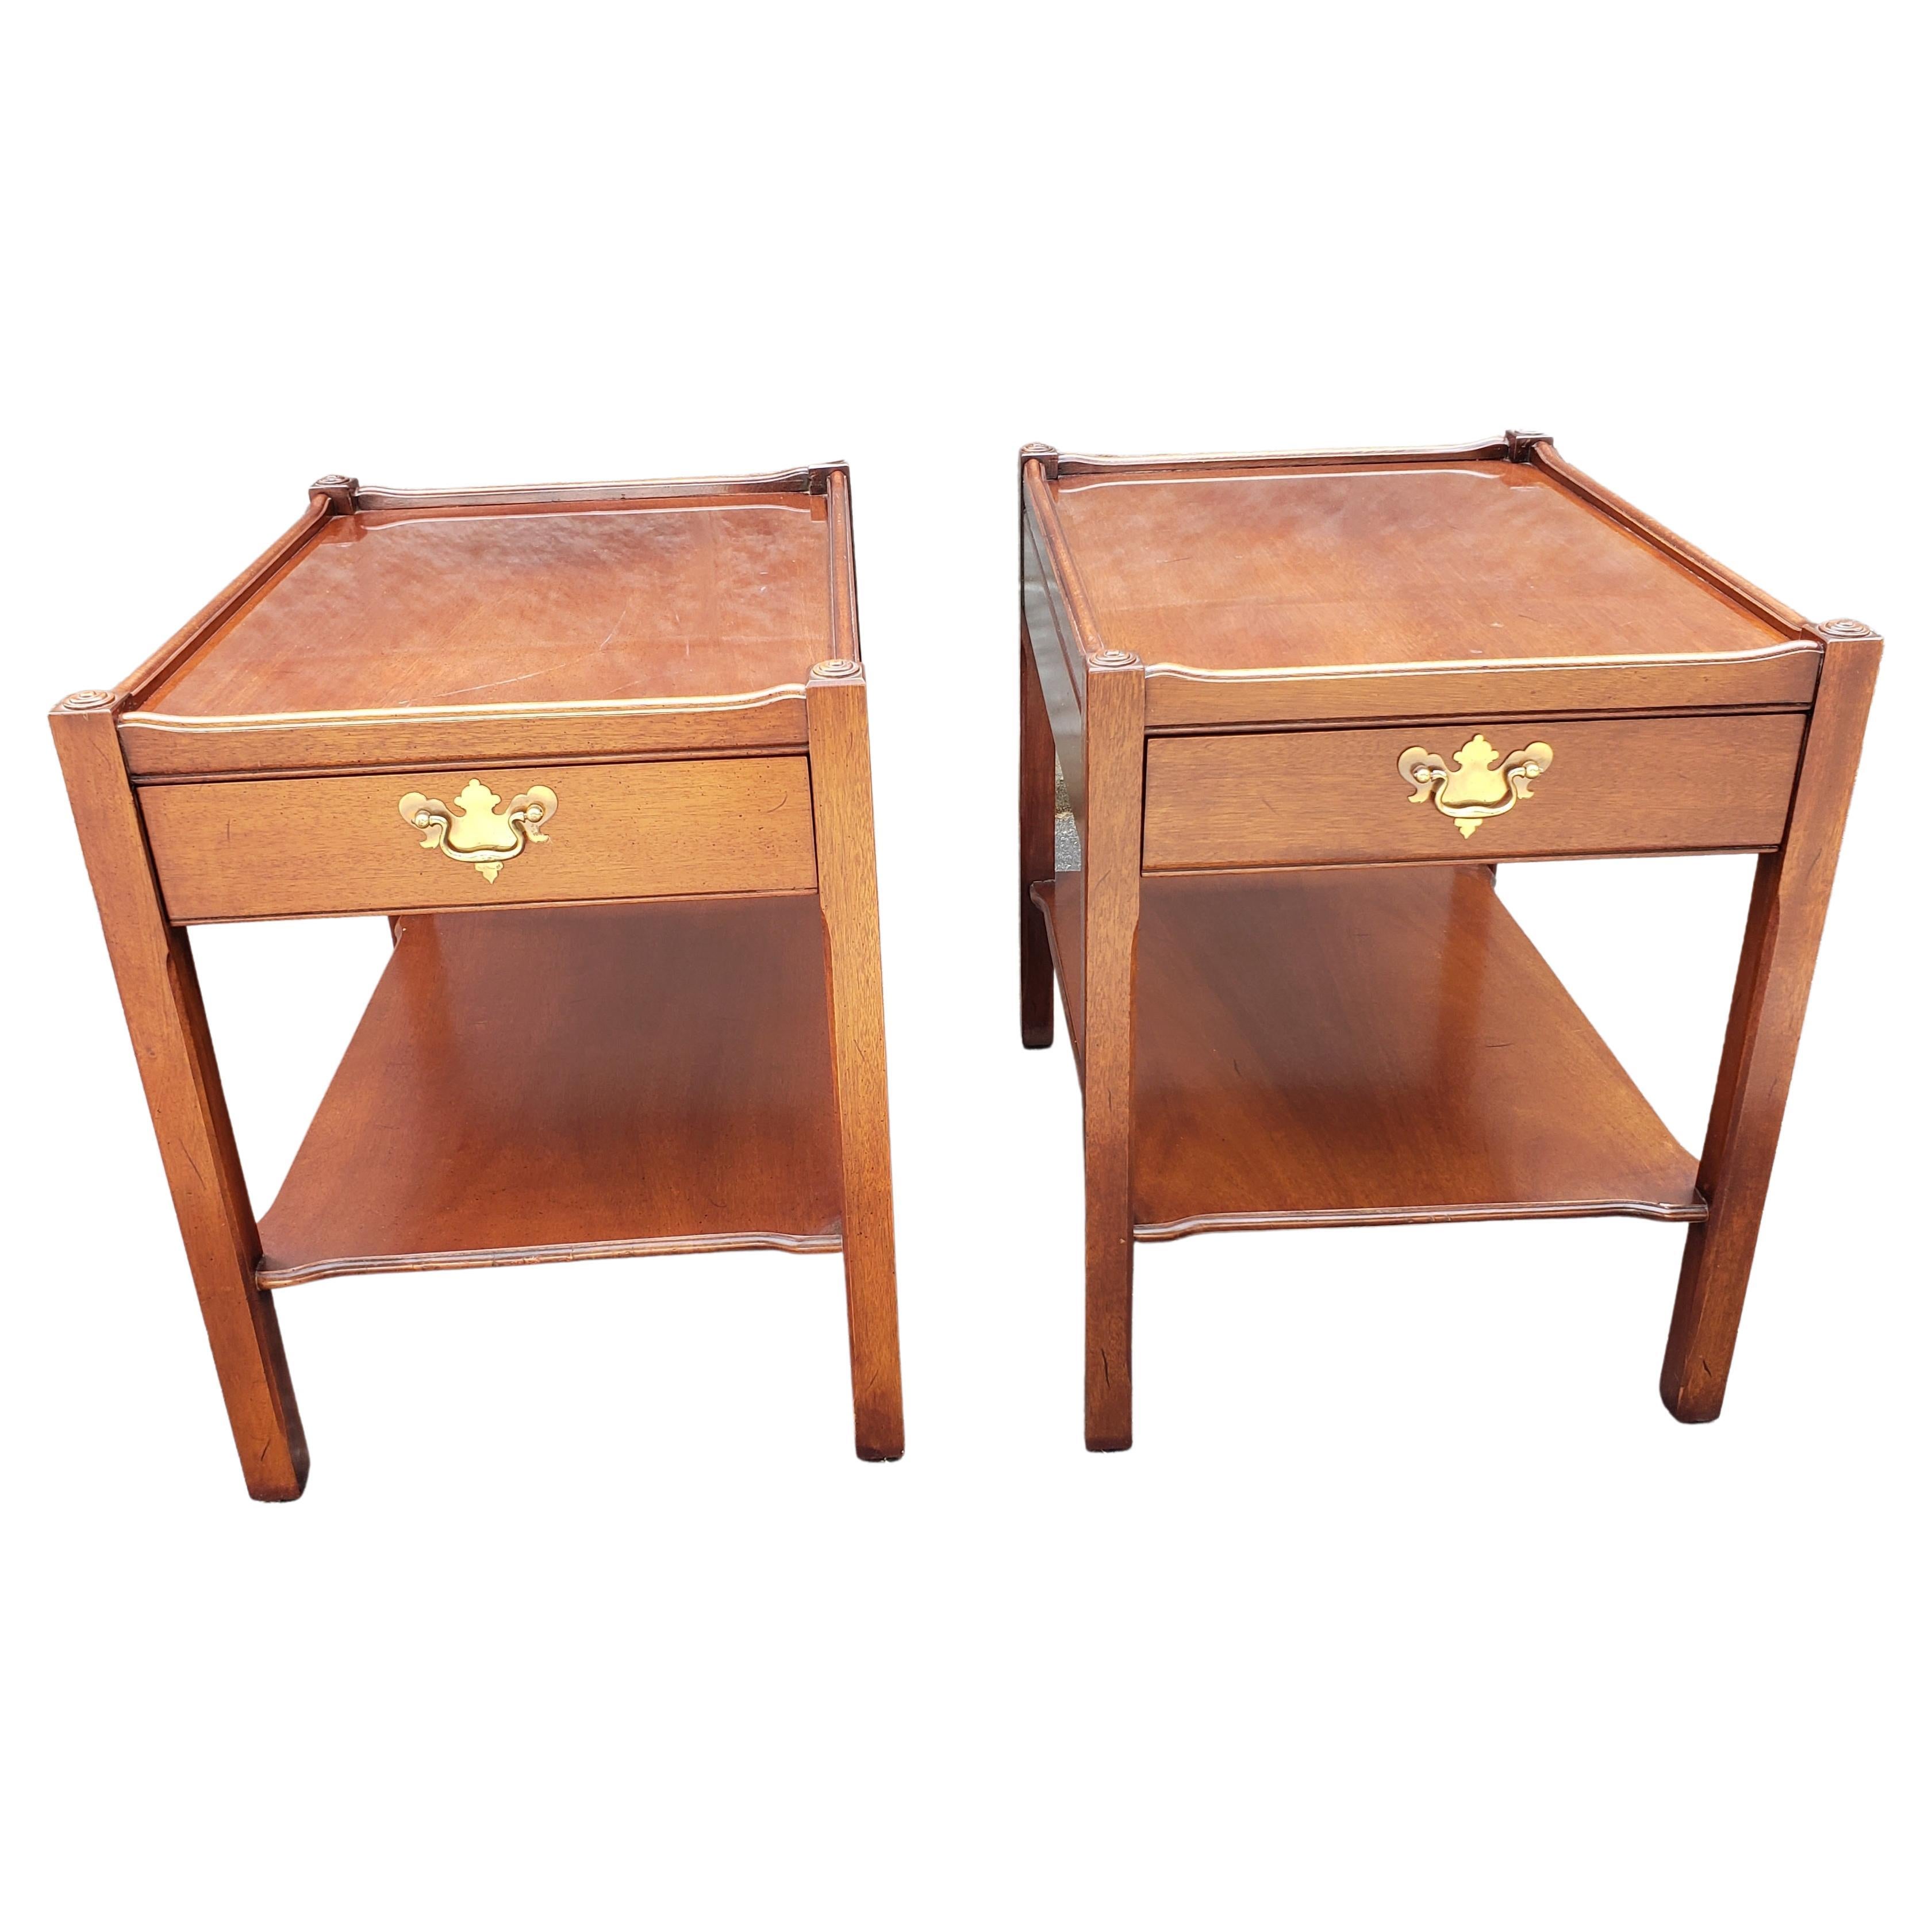 Modern Hickory Chair Co. James River Collection Solid Mahogany Side Tables, a Pair For Sale